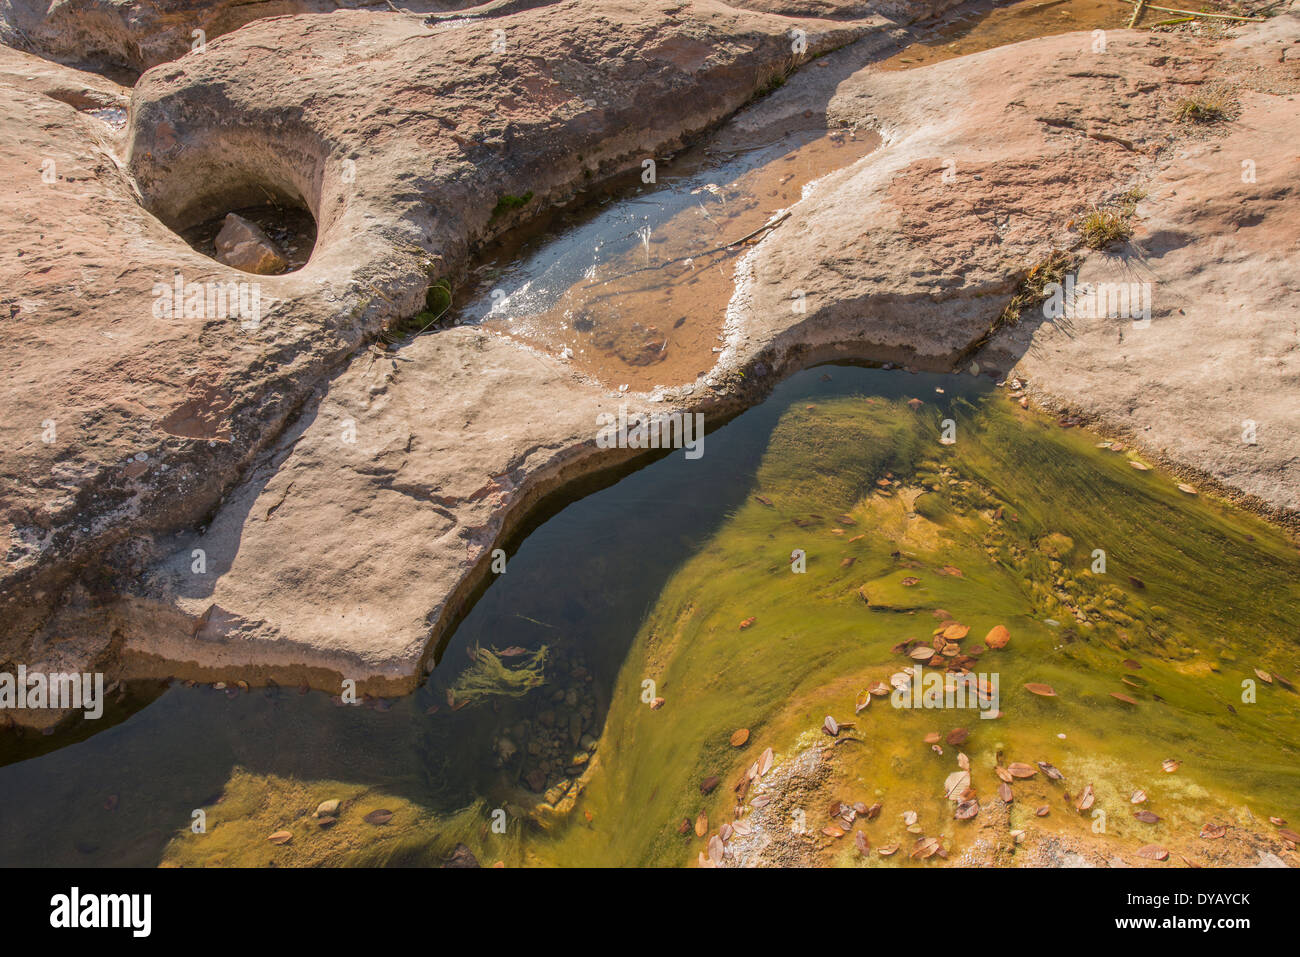 Rock pools carved by a creek harbouring filament algae and clean mountain water, Mura, Spain Stock Photo